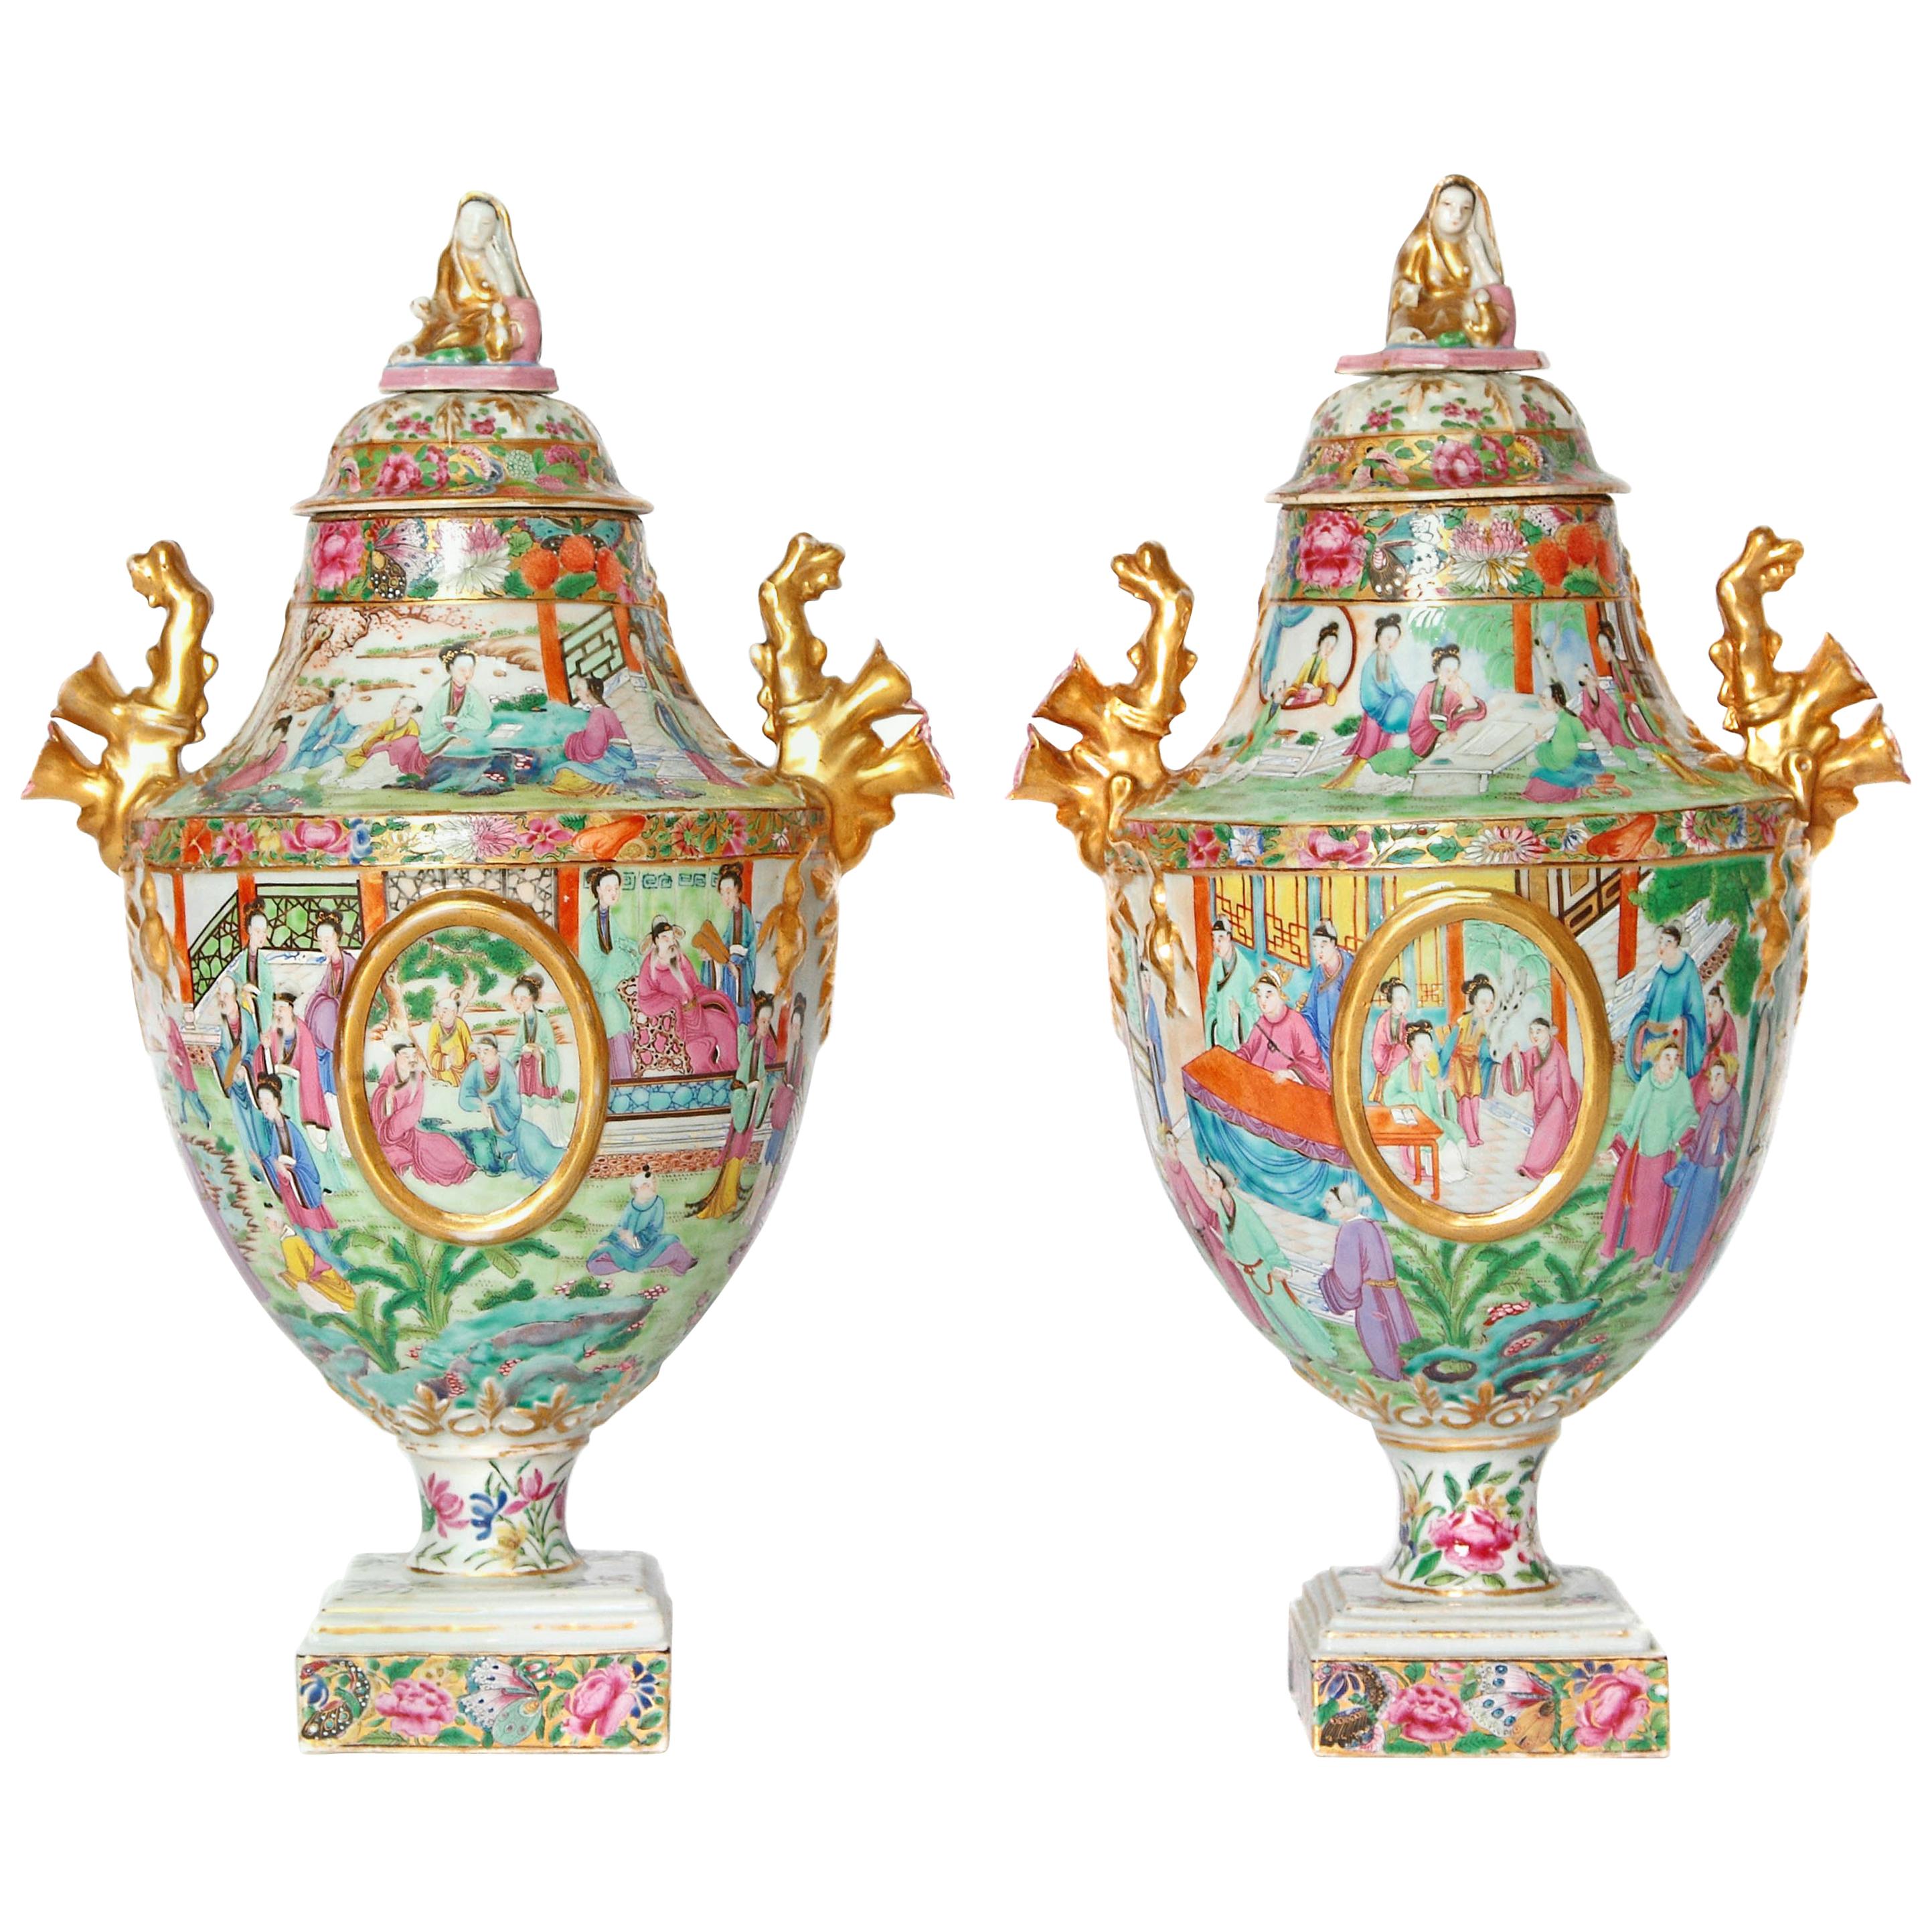 Chinese Export Covered Urns, Pair